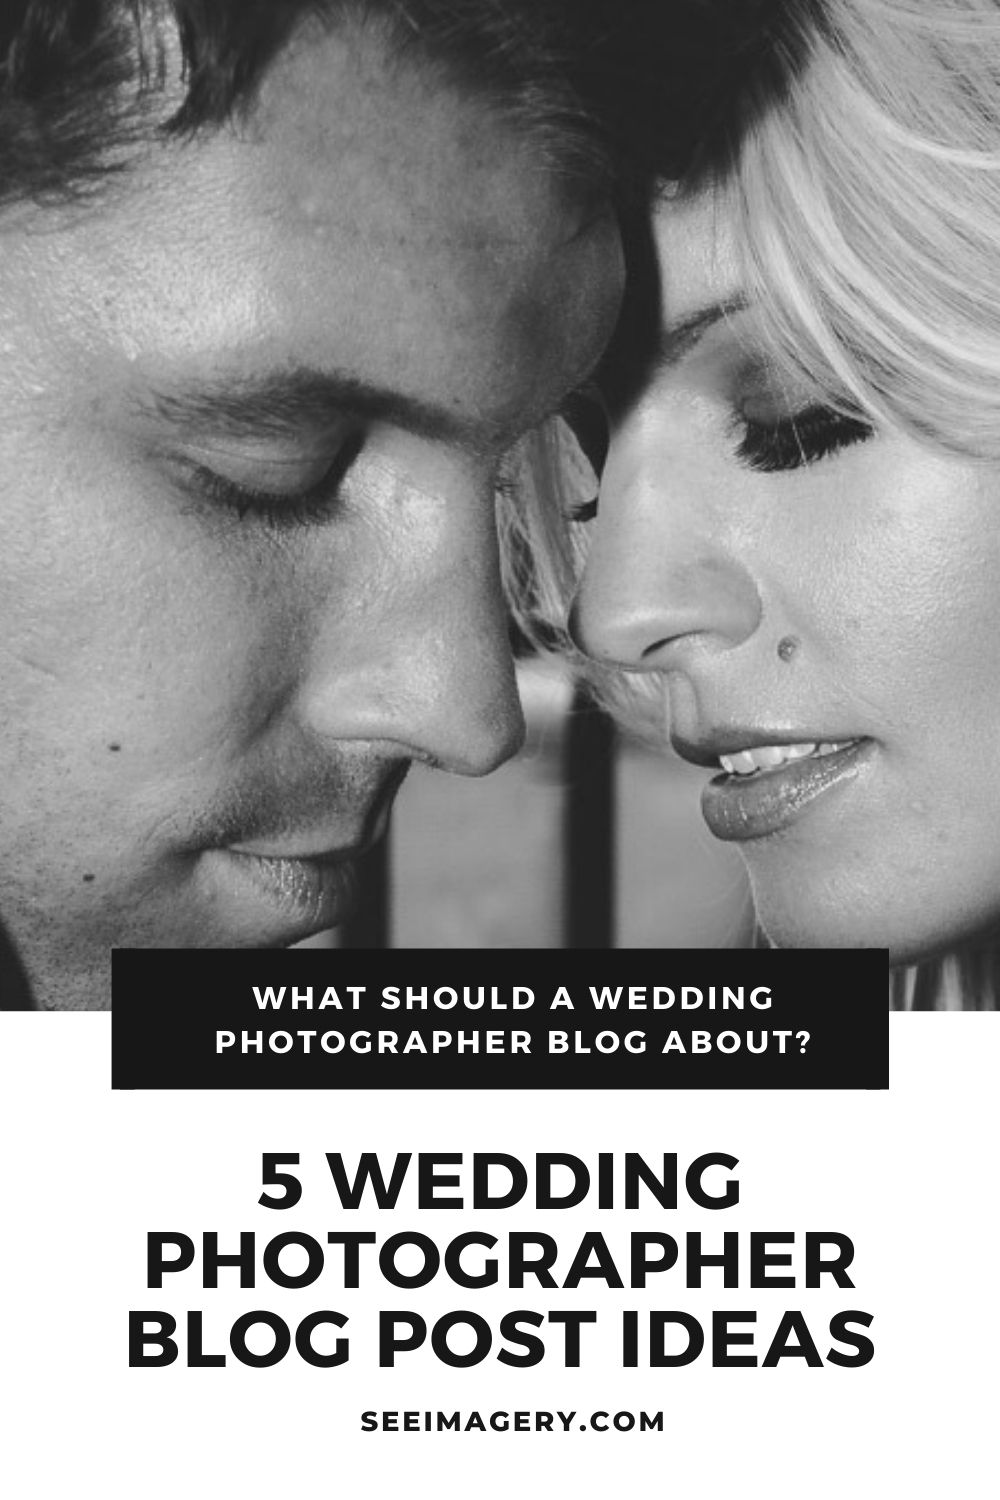 What Should a Wedding Photographer Blog About